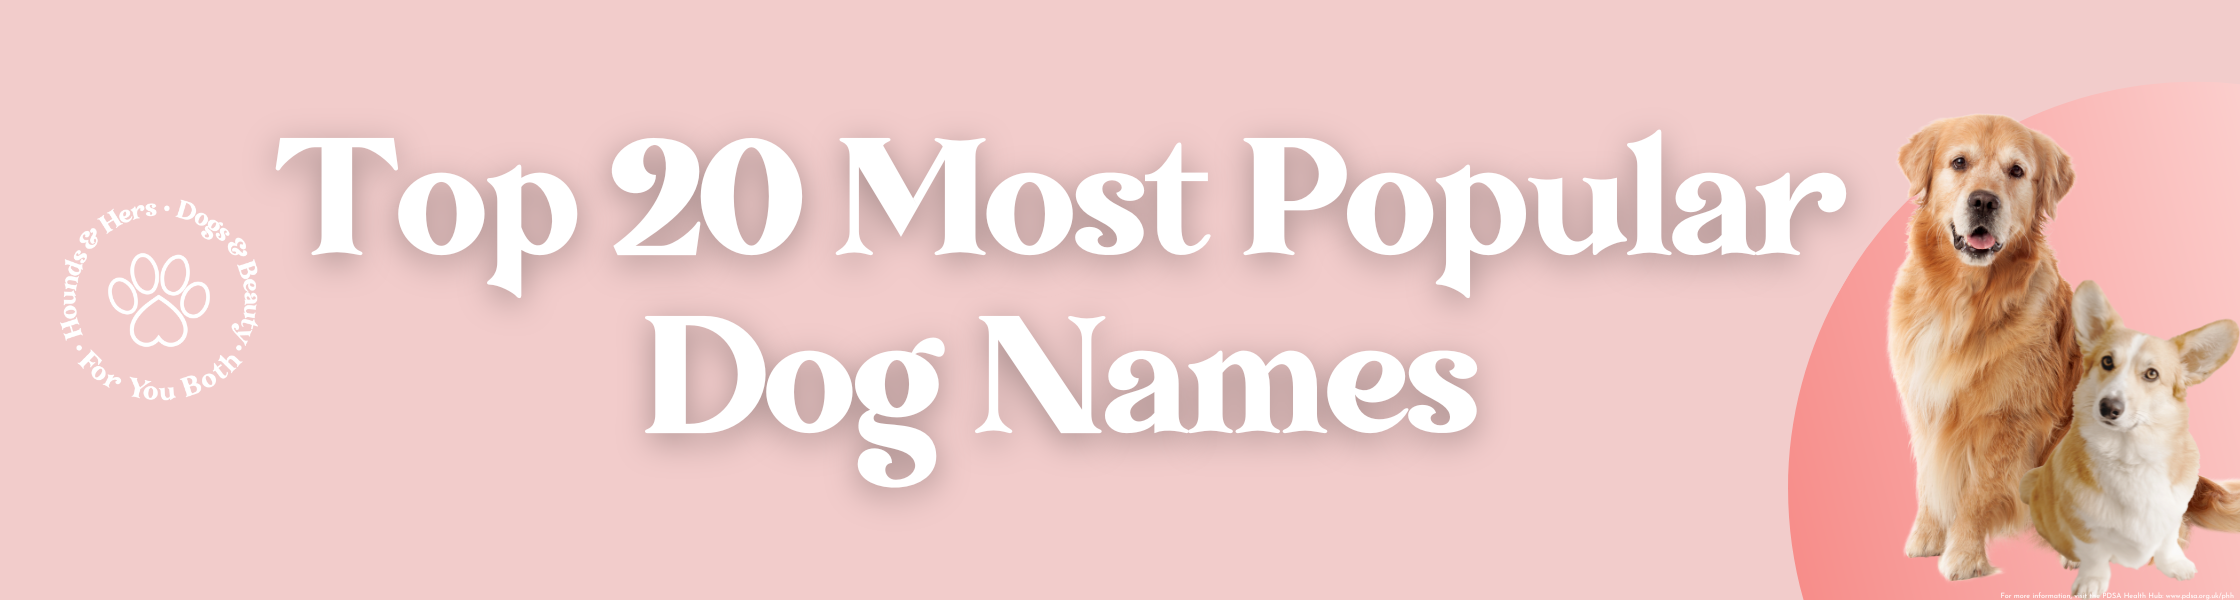 Image shows 'Top 20 Most Popular Dog Names' text with an image of a golden retriever and corgi dog.